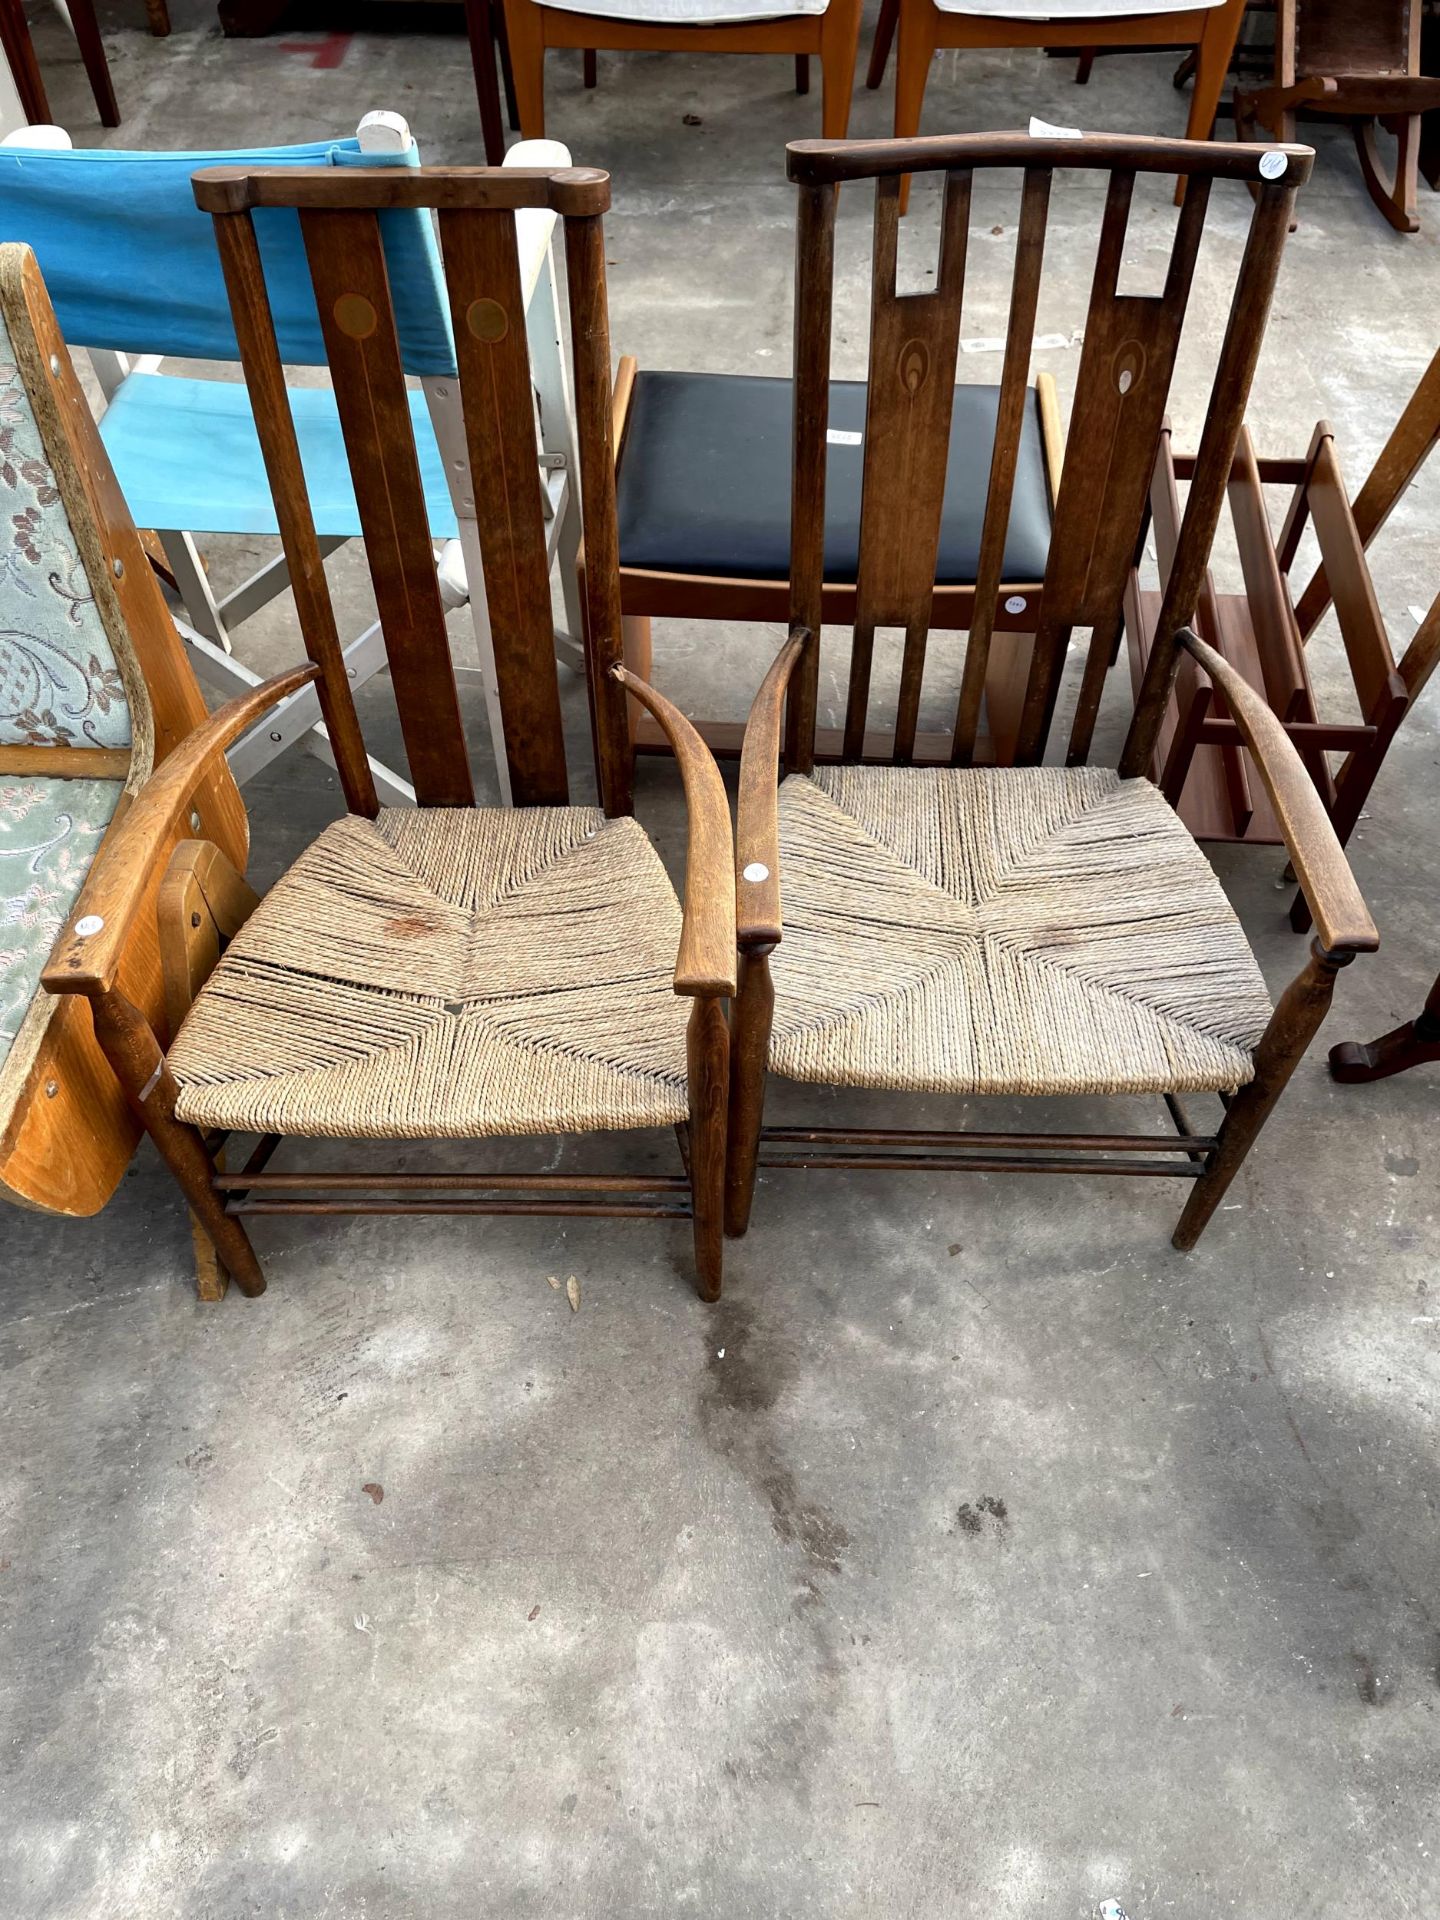 TWO ART NOUVEAU LIBERTY STYLE LOW ARMCHAIRS WITH INLAID WITH BACK PANELS AND RUSH SEATS